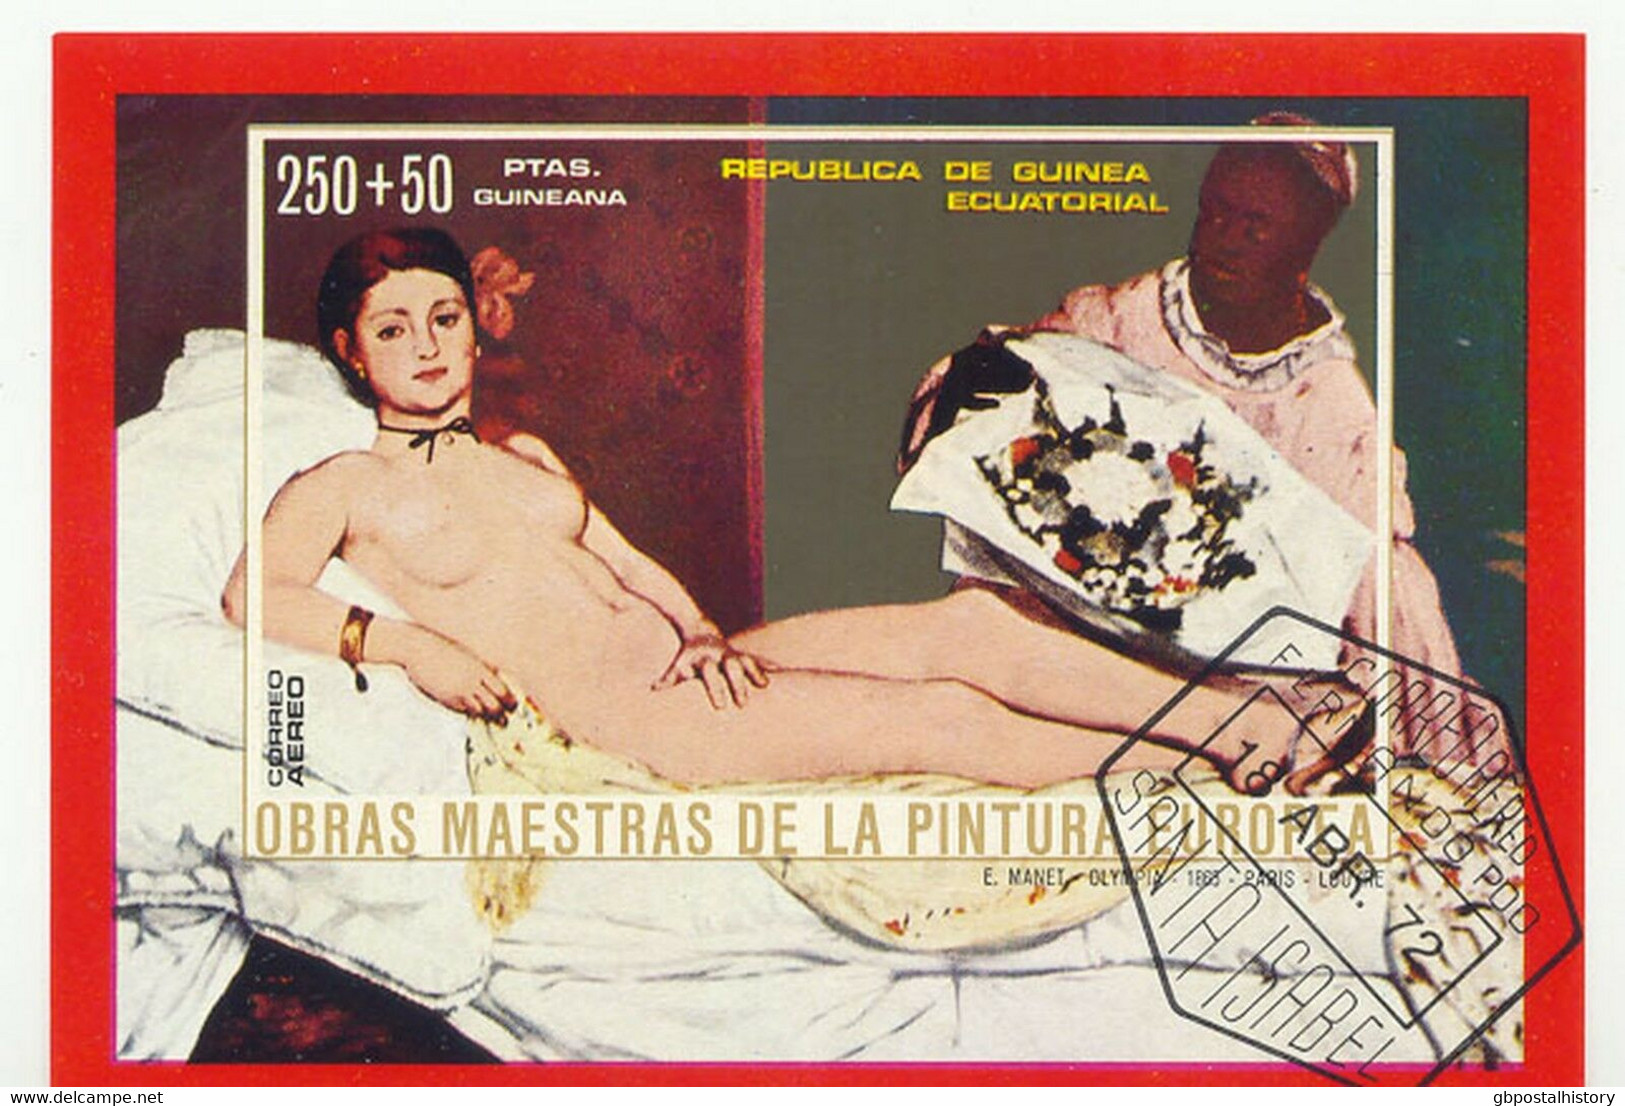 EQUATORIAL GUINEA 1972 Nude Painting By P. Manet 250+50 Ptas. IMPERFORATED Superb Used M/S ERROR/VARIETY Kissed Backside - Equatorial Guinea